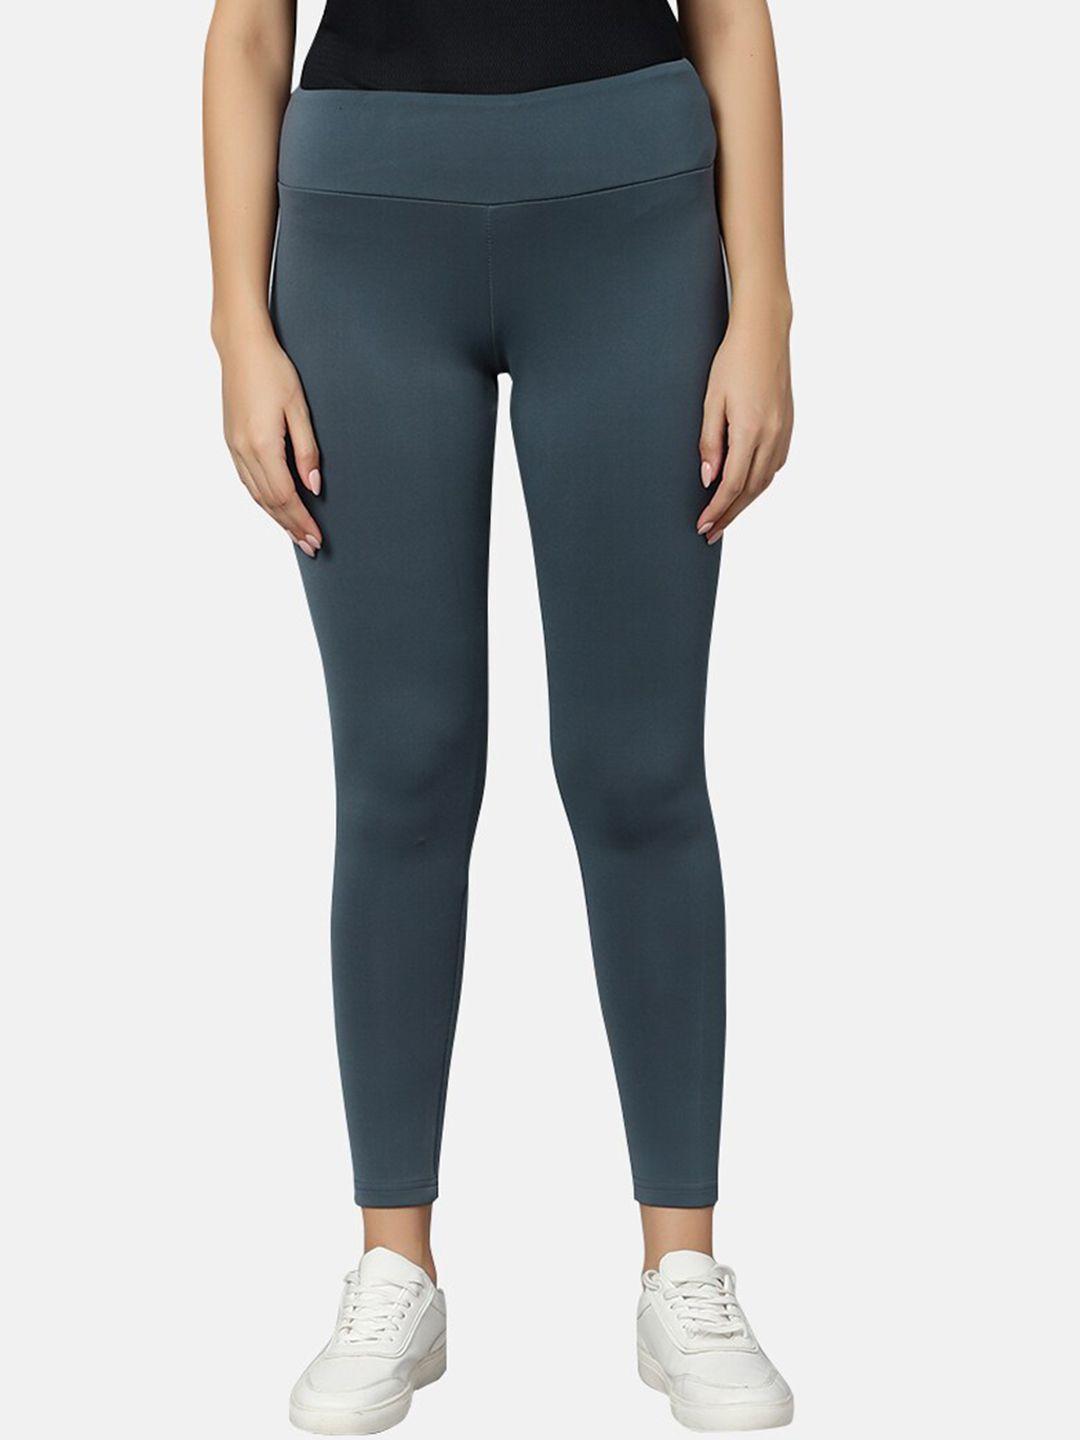 omtex-ankle-length-high-rise-yoga-tights